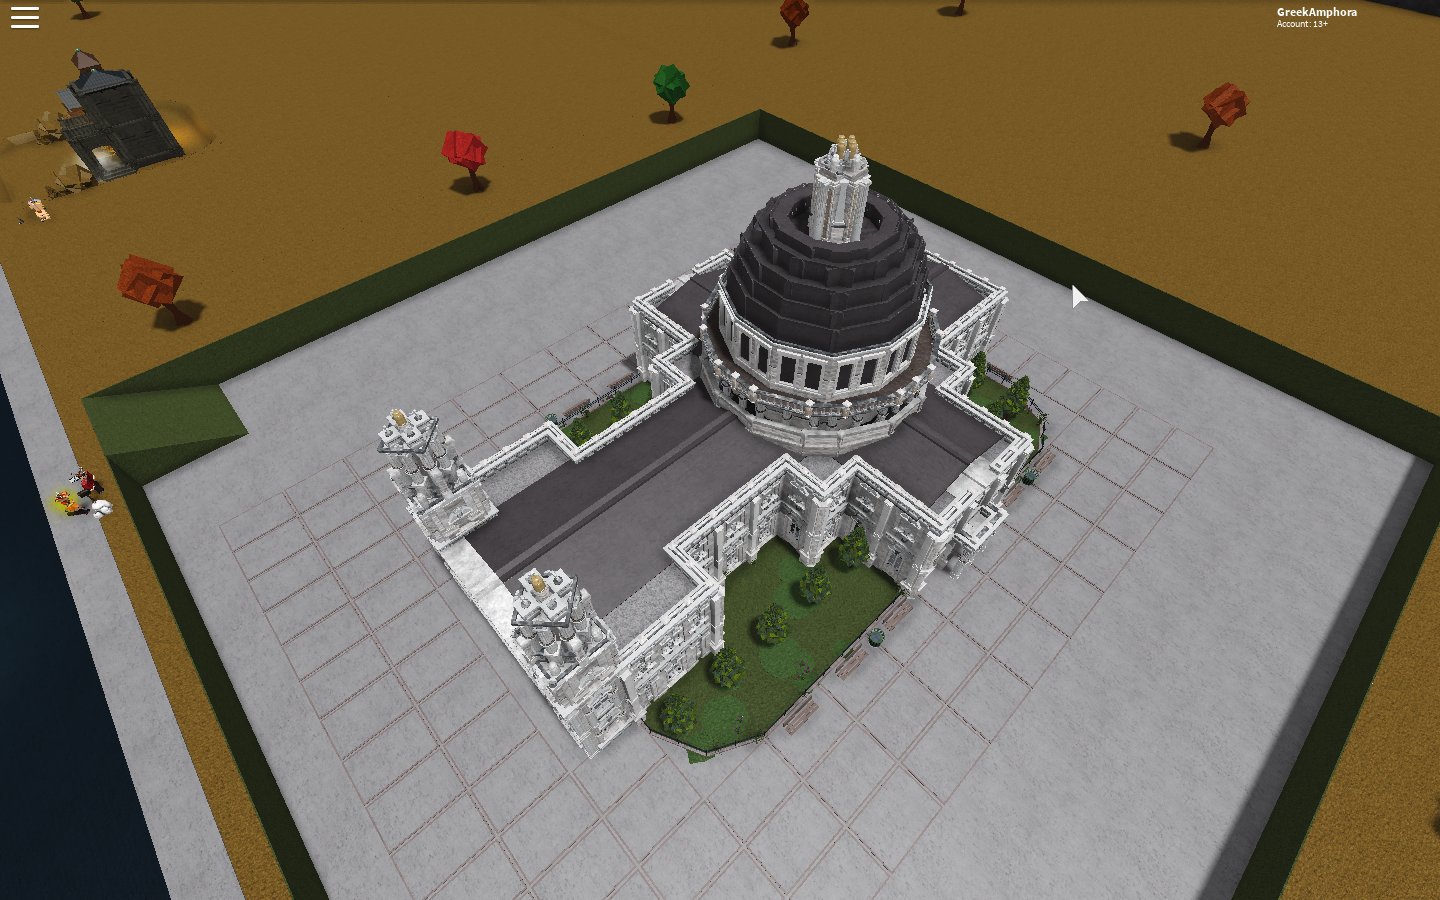 Rusty On Twitter New Bloxburg Build Here Is St Pauls Cathedral In London Built Between 1675 1710 Big Big Big Thanks To Rainadoty For Help On The Dome And Idea If It Wasn T - wreched london westminster abbey for crow roblox